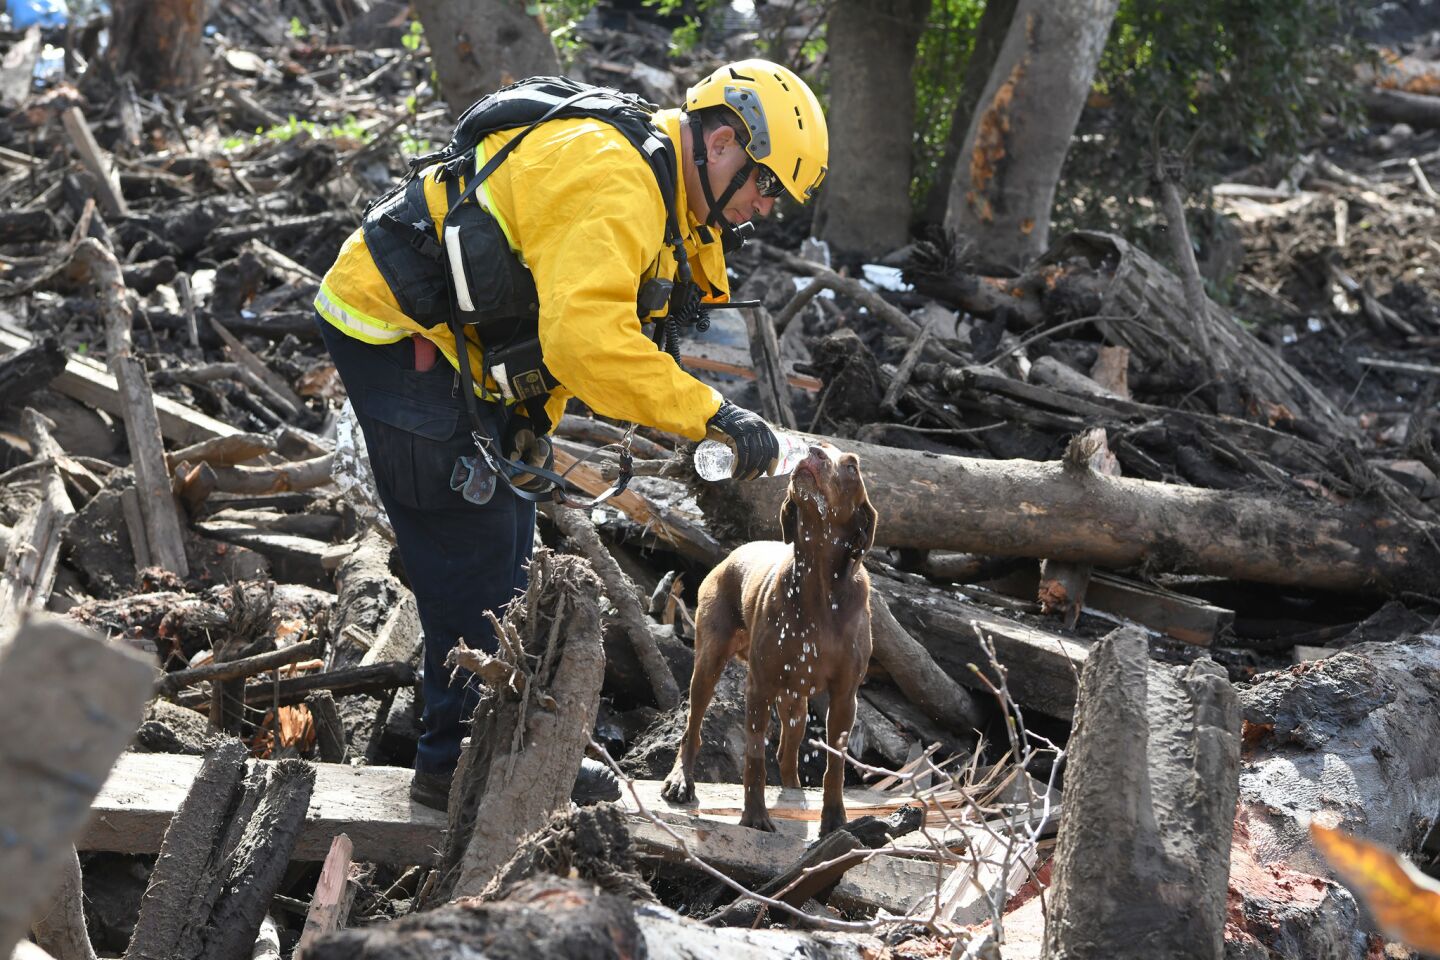 Los Angeles City firefighter Jeffrey Neu gives water to Faith, a cadaver dog, while searching in a wood pile in Montectio Creek.